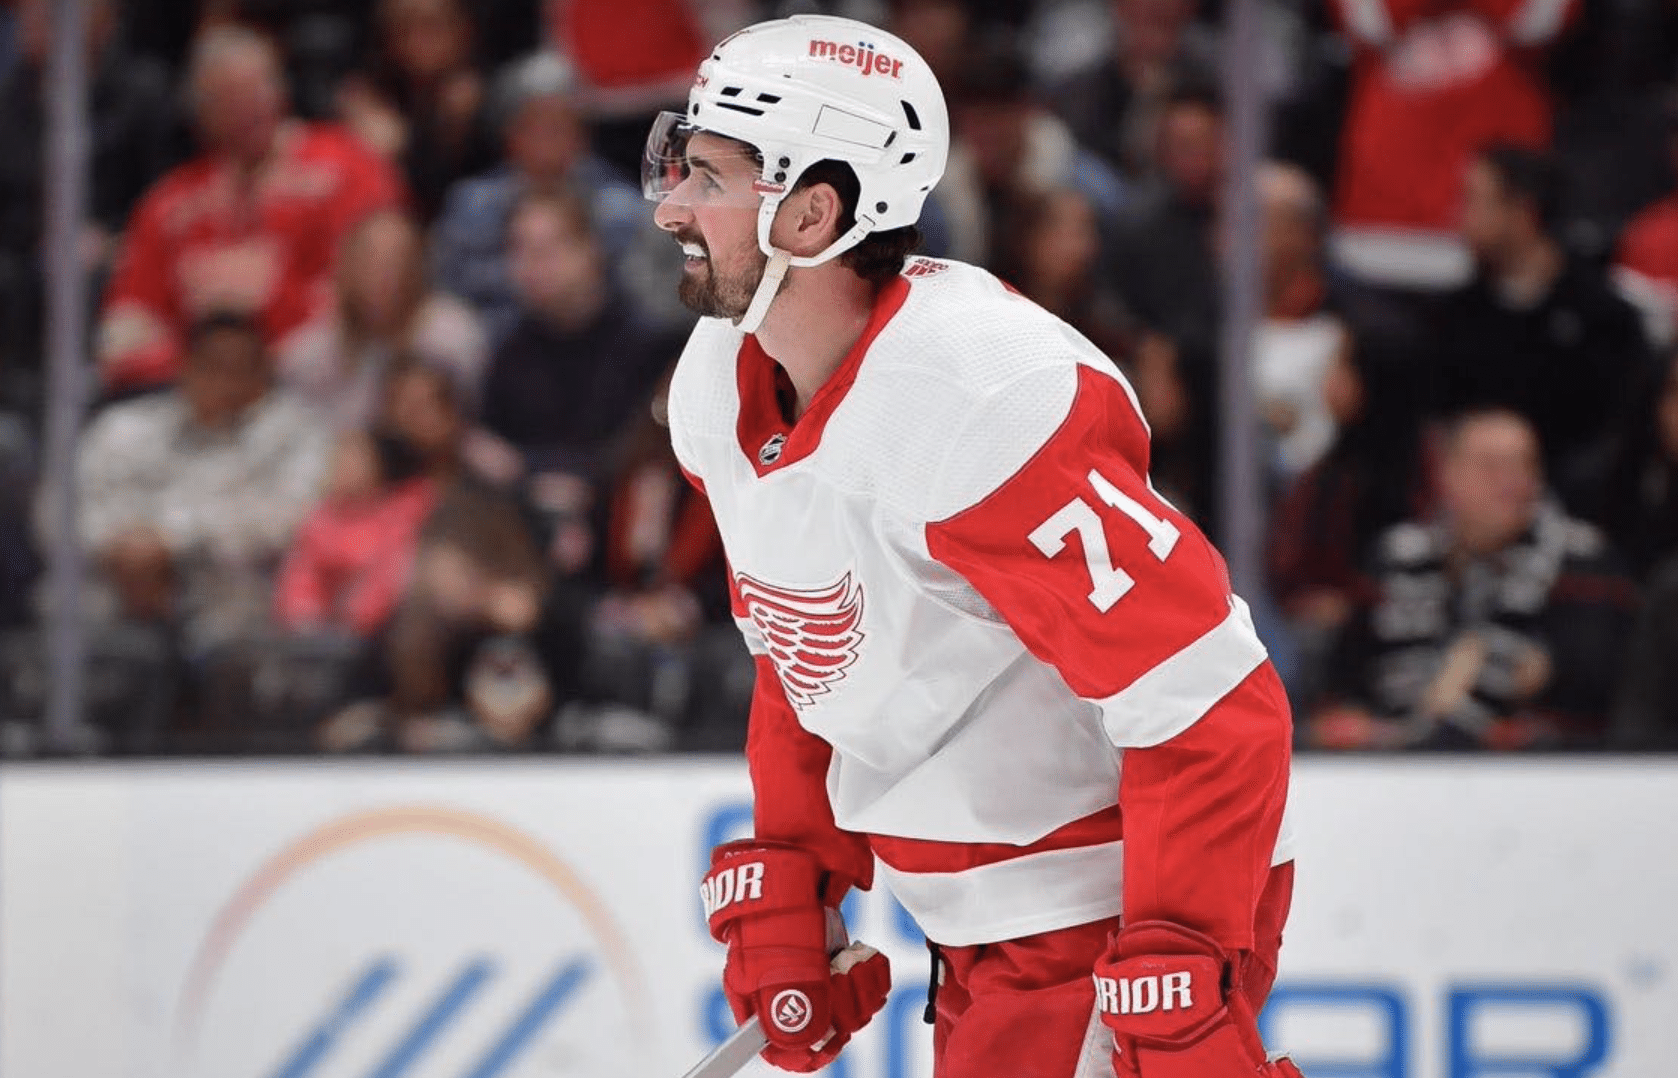 Dylan Larkin says Detroit Red Wings Photo Credit: Gary A. Vasquez, USA Today Sports